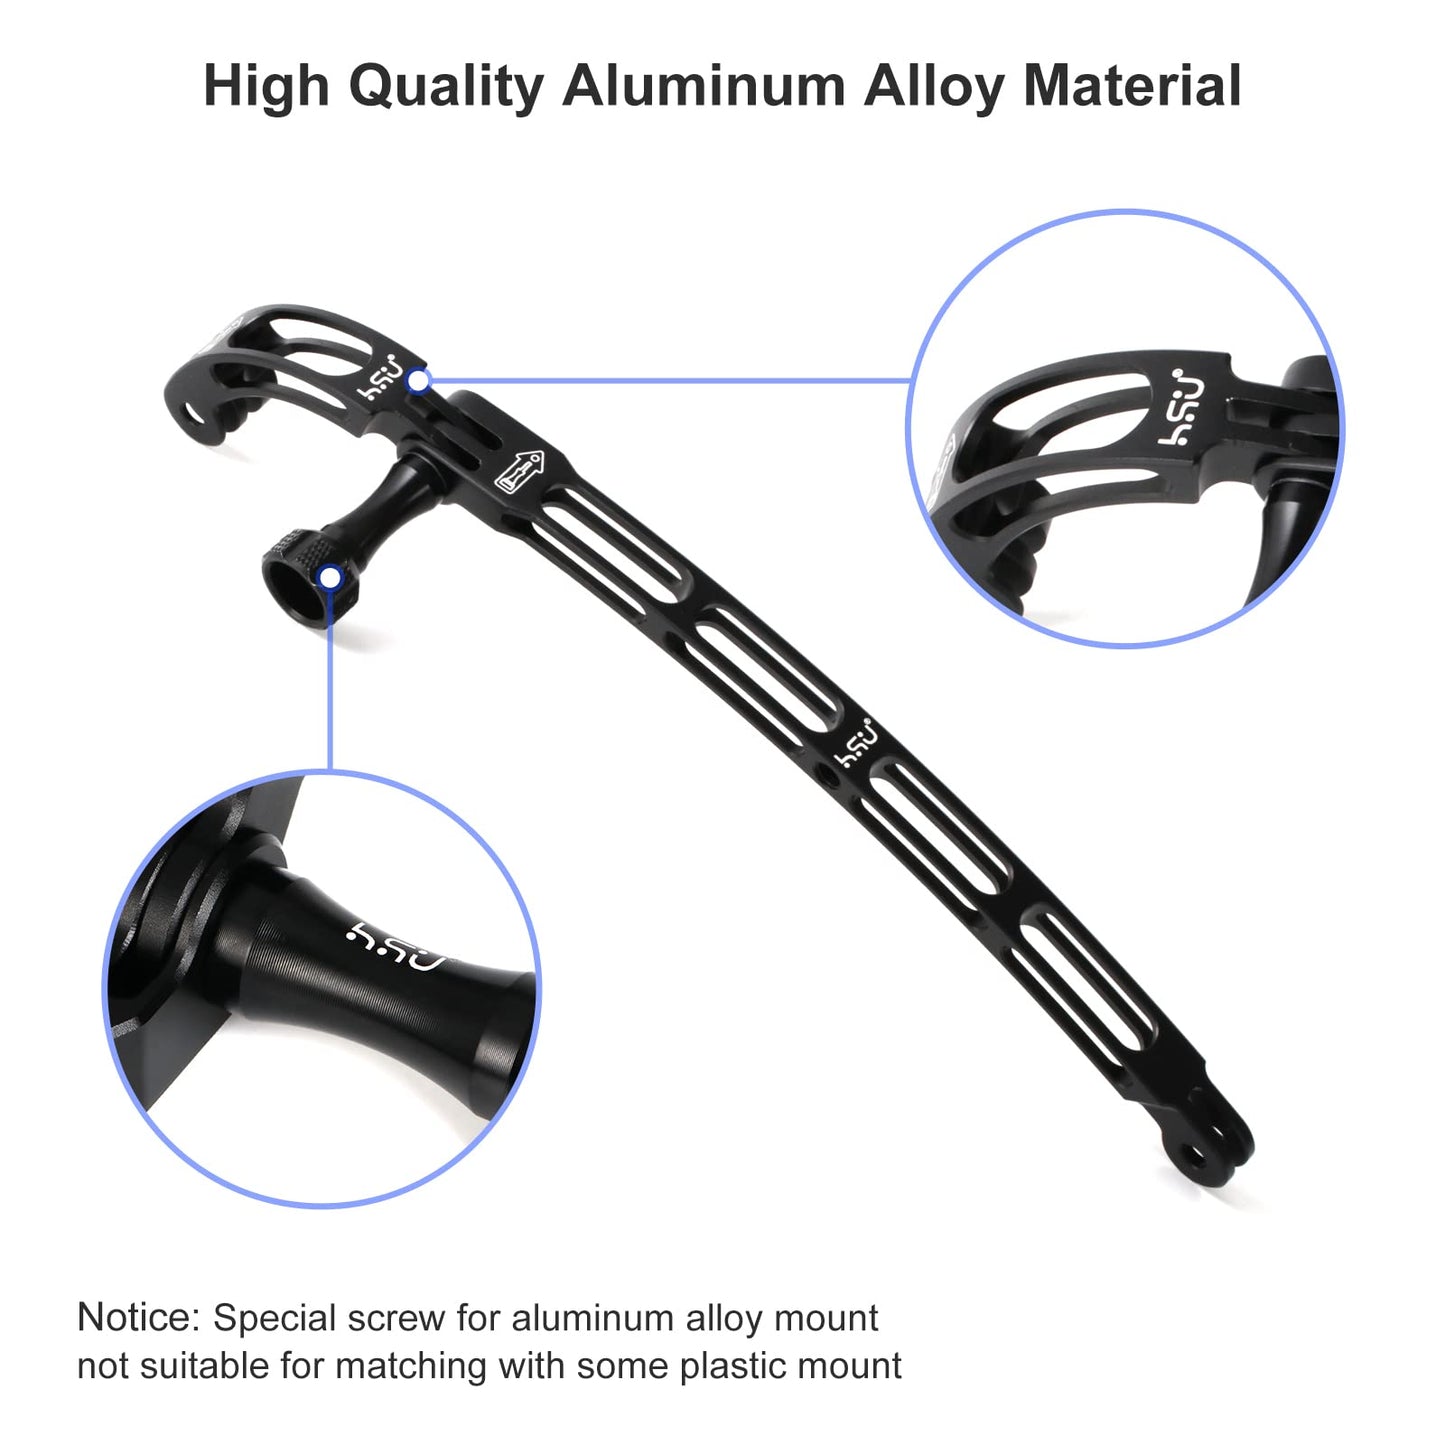 (7 Pcs) HSU All Aluminum Alloy Curved Extension Arm Kit Mount Helmet Stick for GoPro/DJI Osmo Action